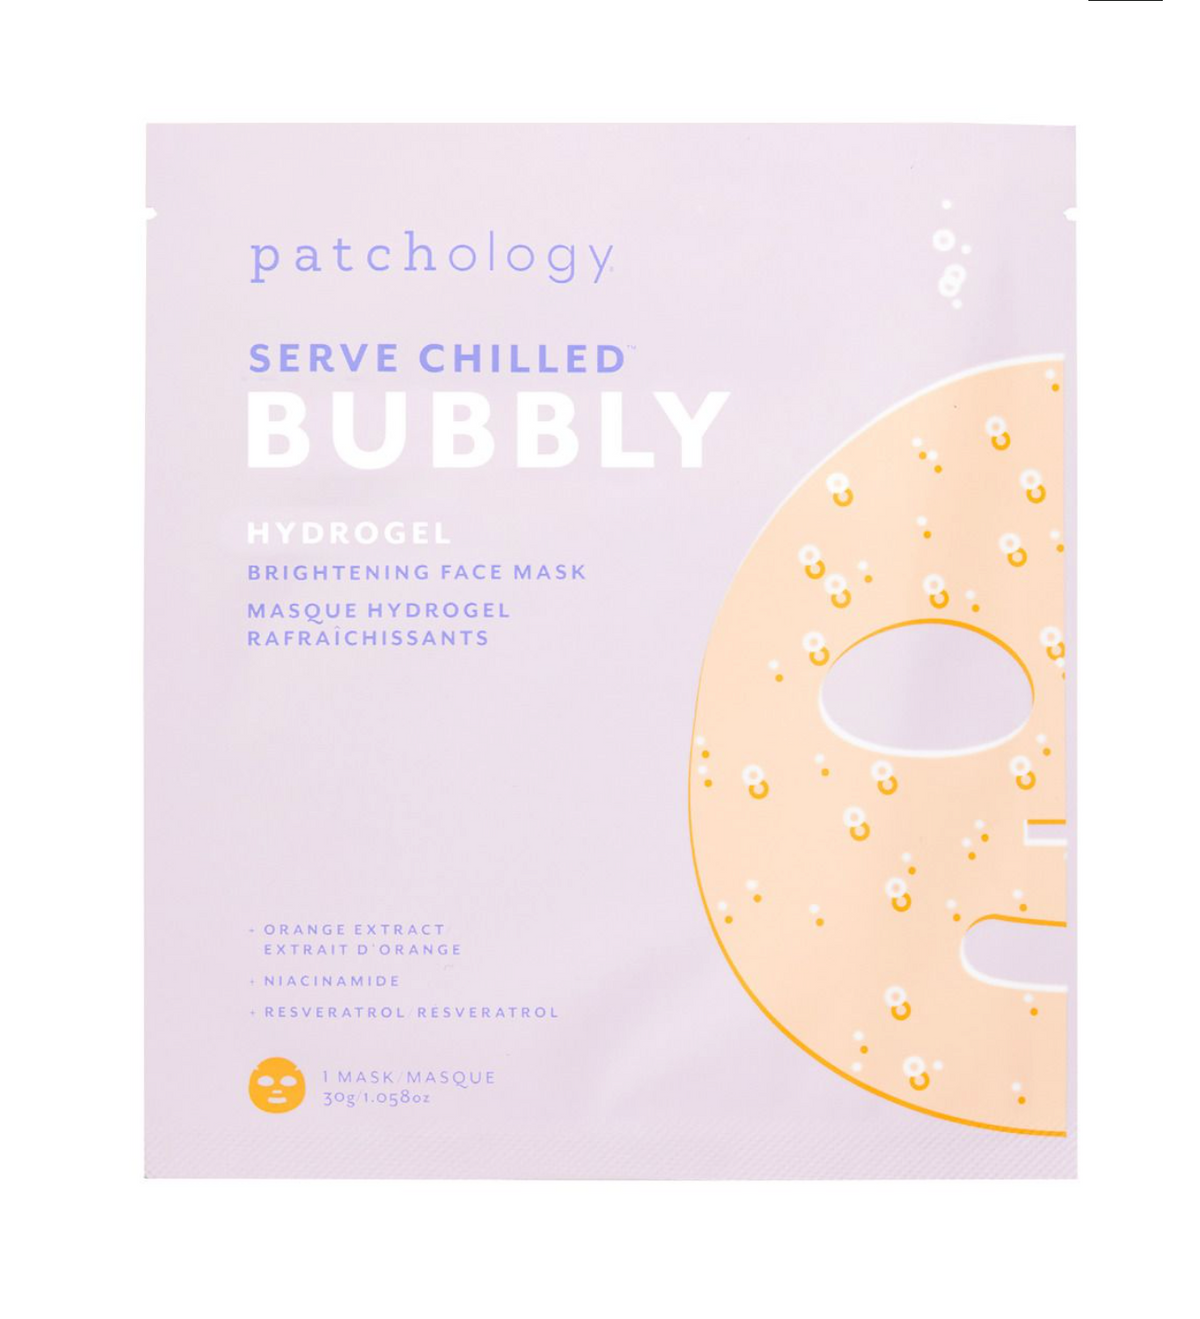 Serve Chilled Bubbly Brightening Hydrogel Face Mask